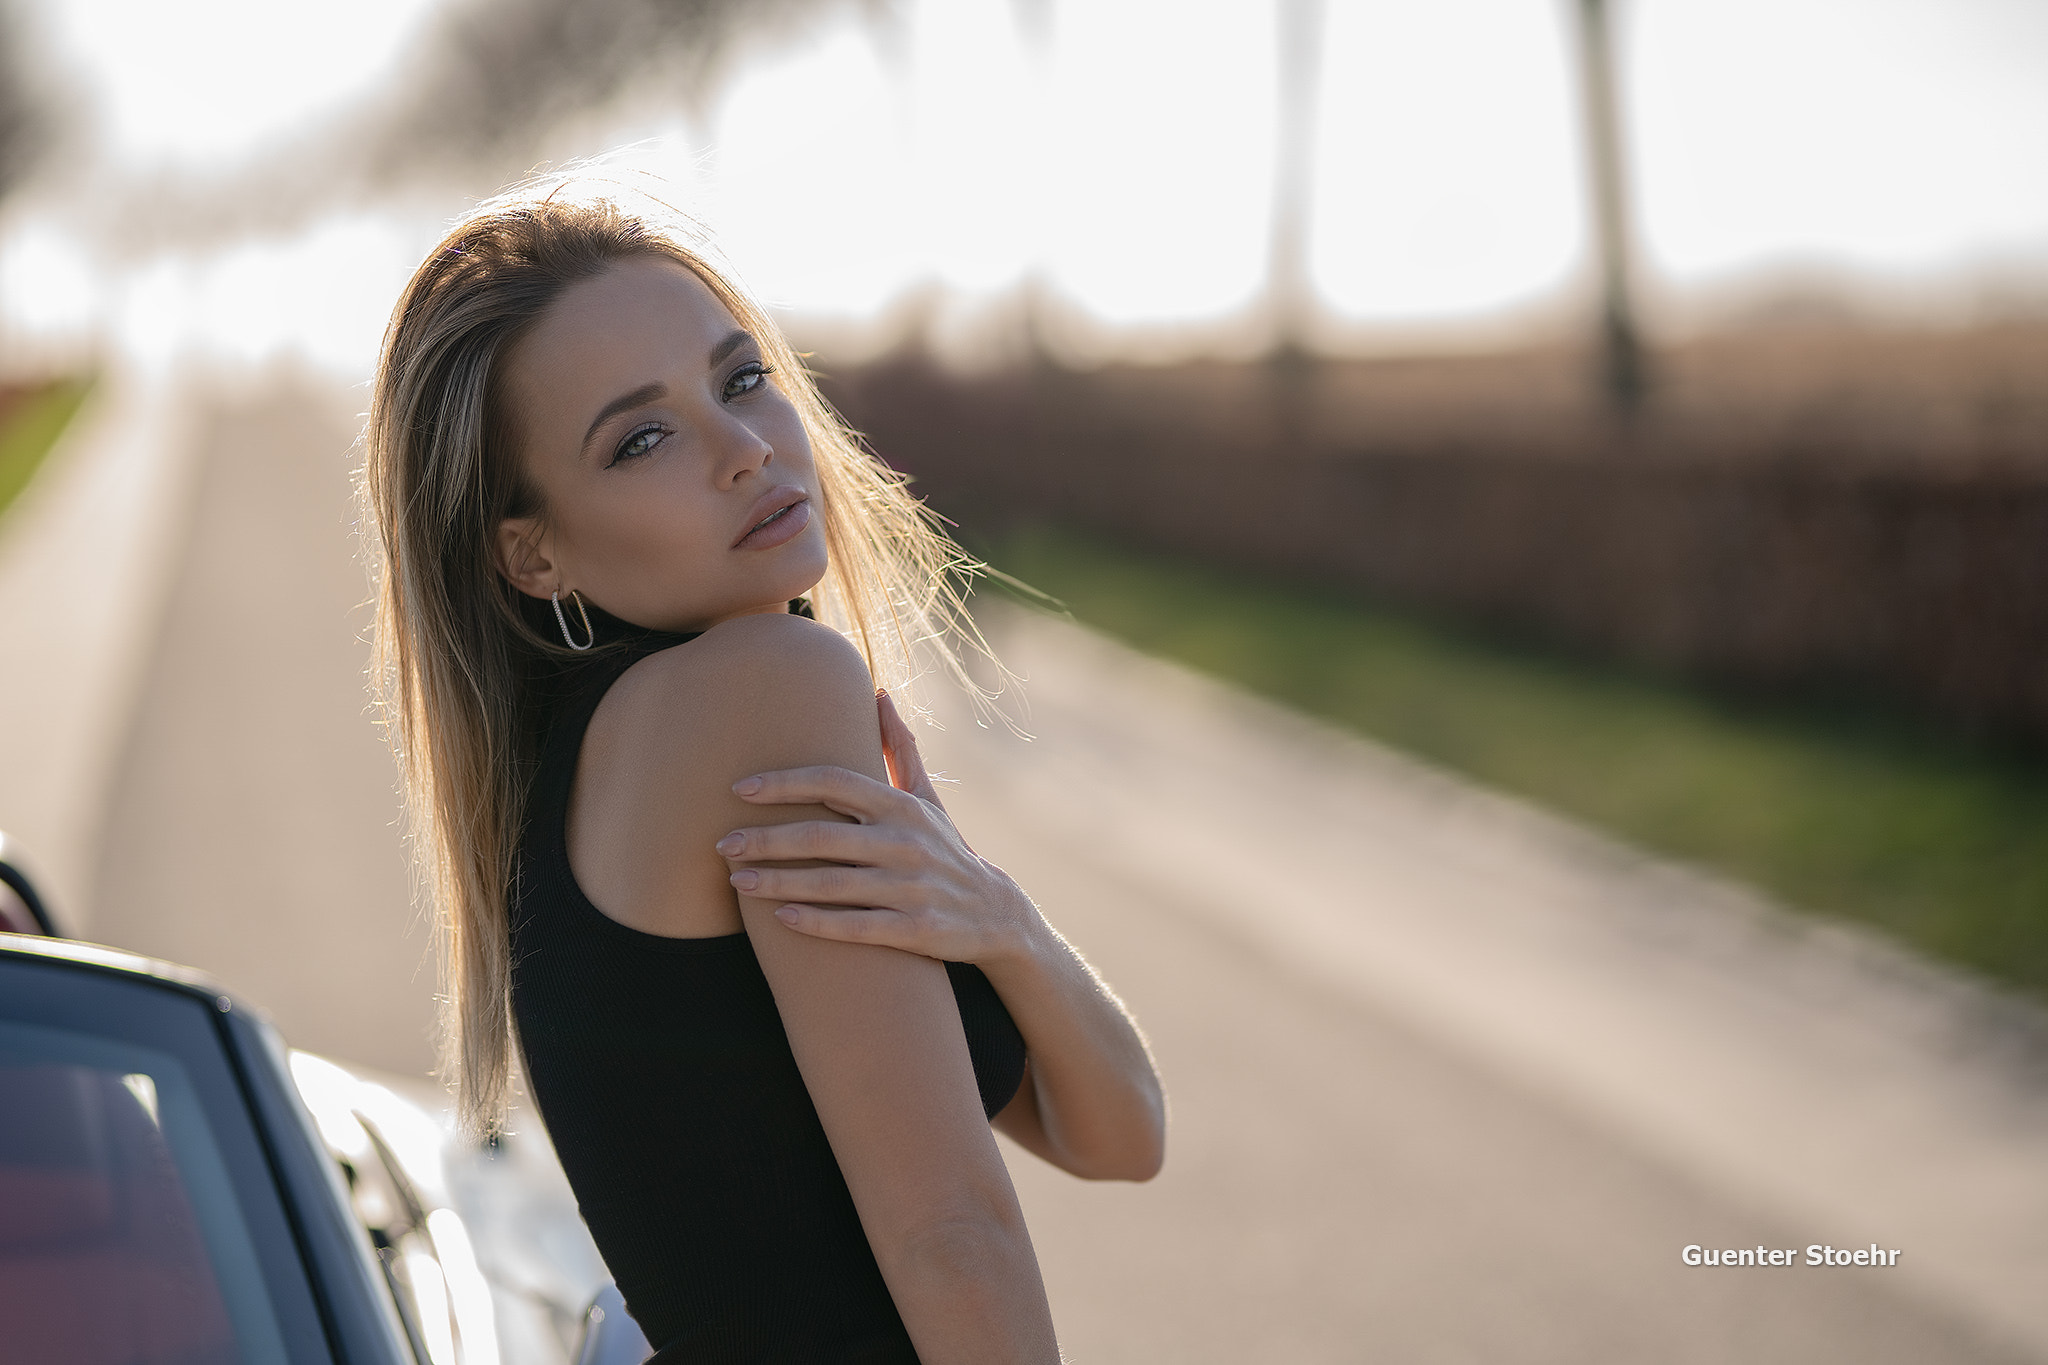 Women Model Leaning Women With Cars Looking At Viewer Women Outdoors Makeup Long Hair 2048x1365